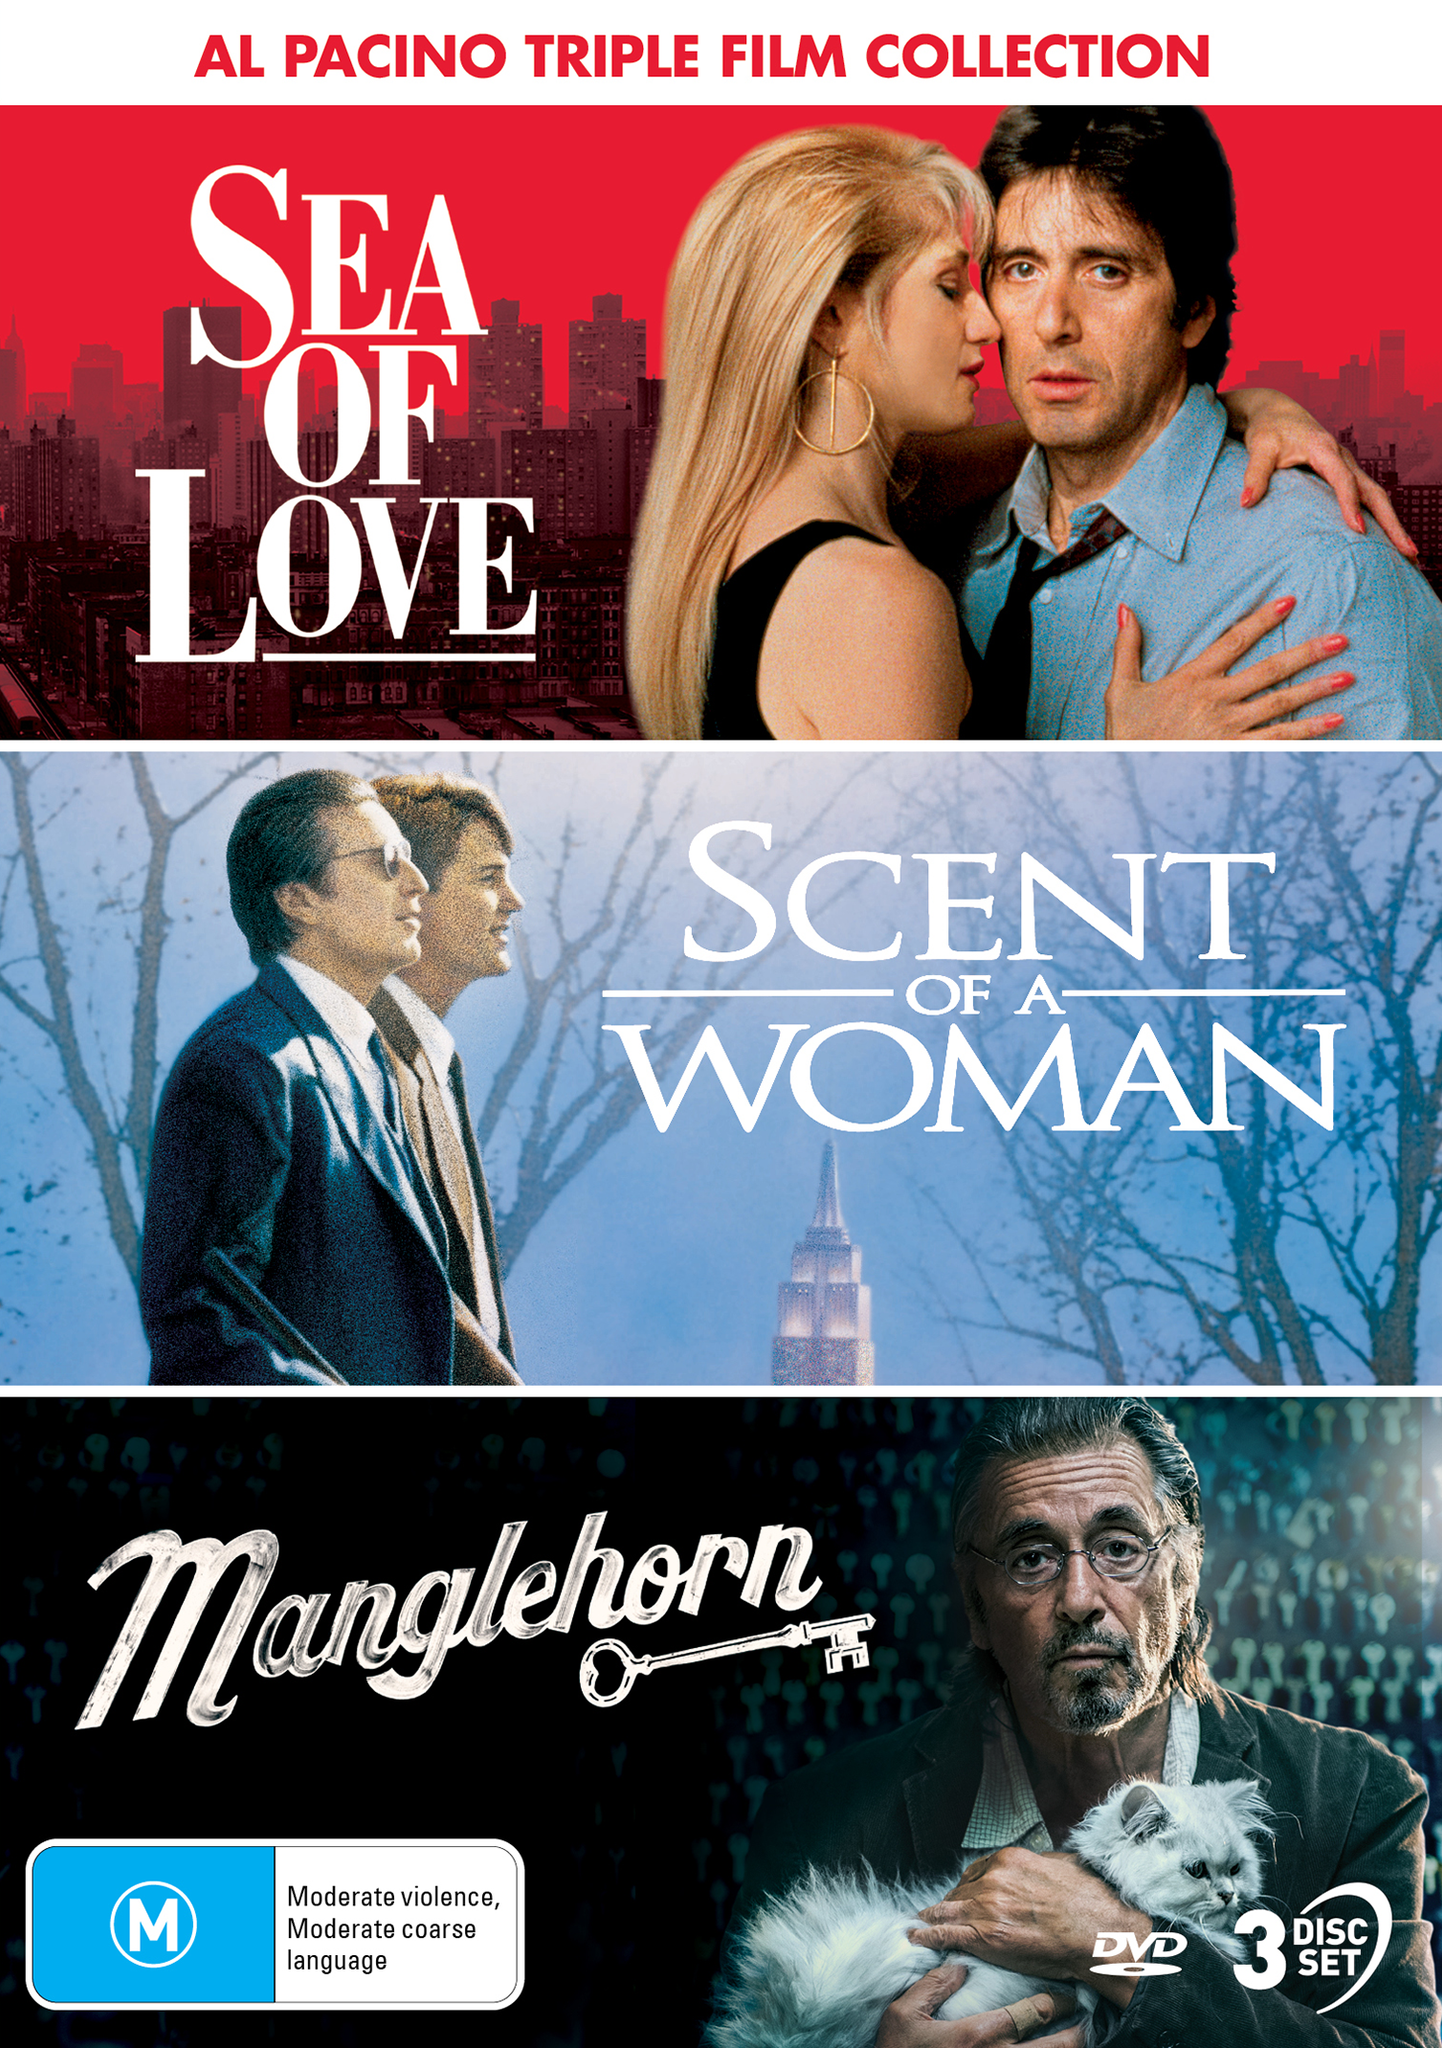 AL PACINO: TRIPLE FILM COLLECTION (SEA OF LOVE / SCENT OF A WOMAN / MANGLEHORN) - DVD